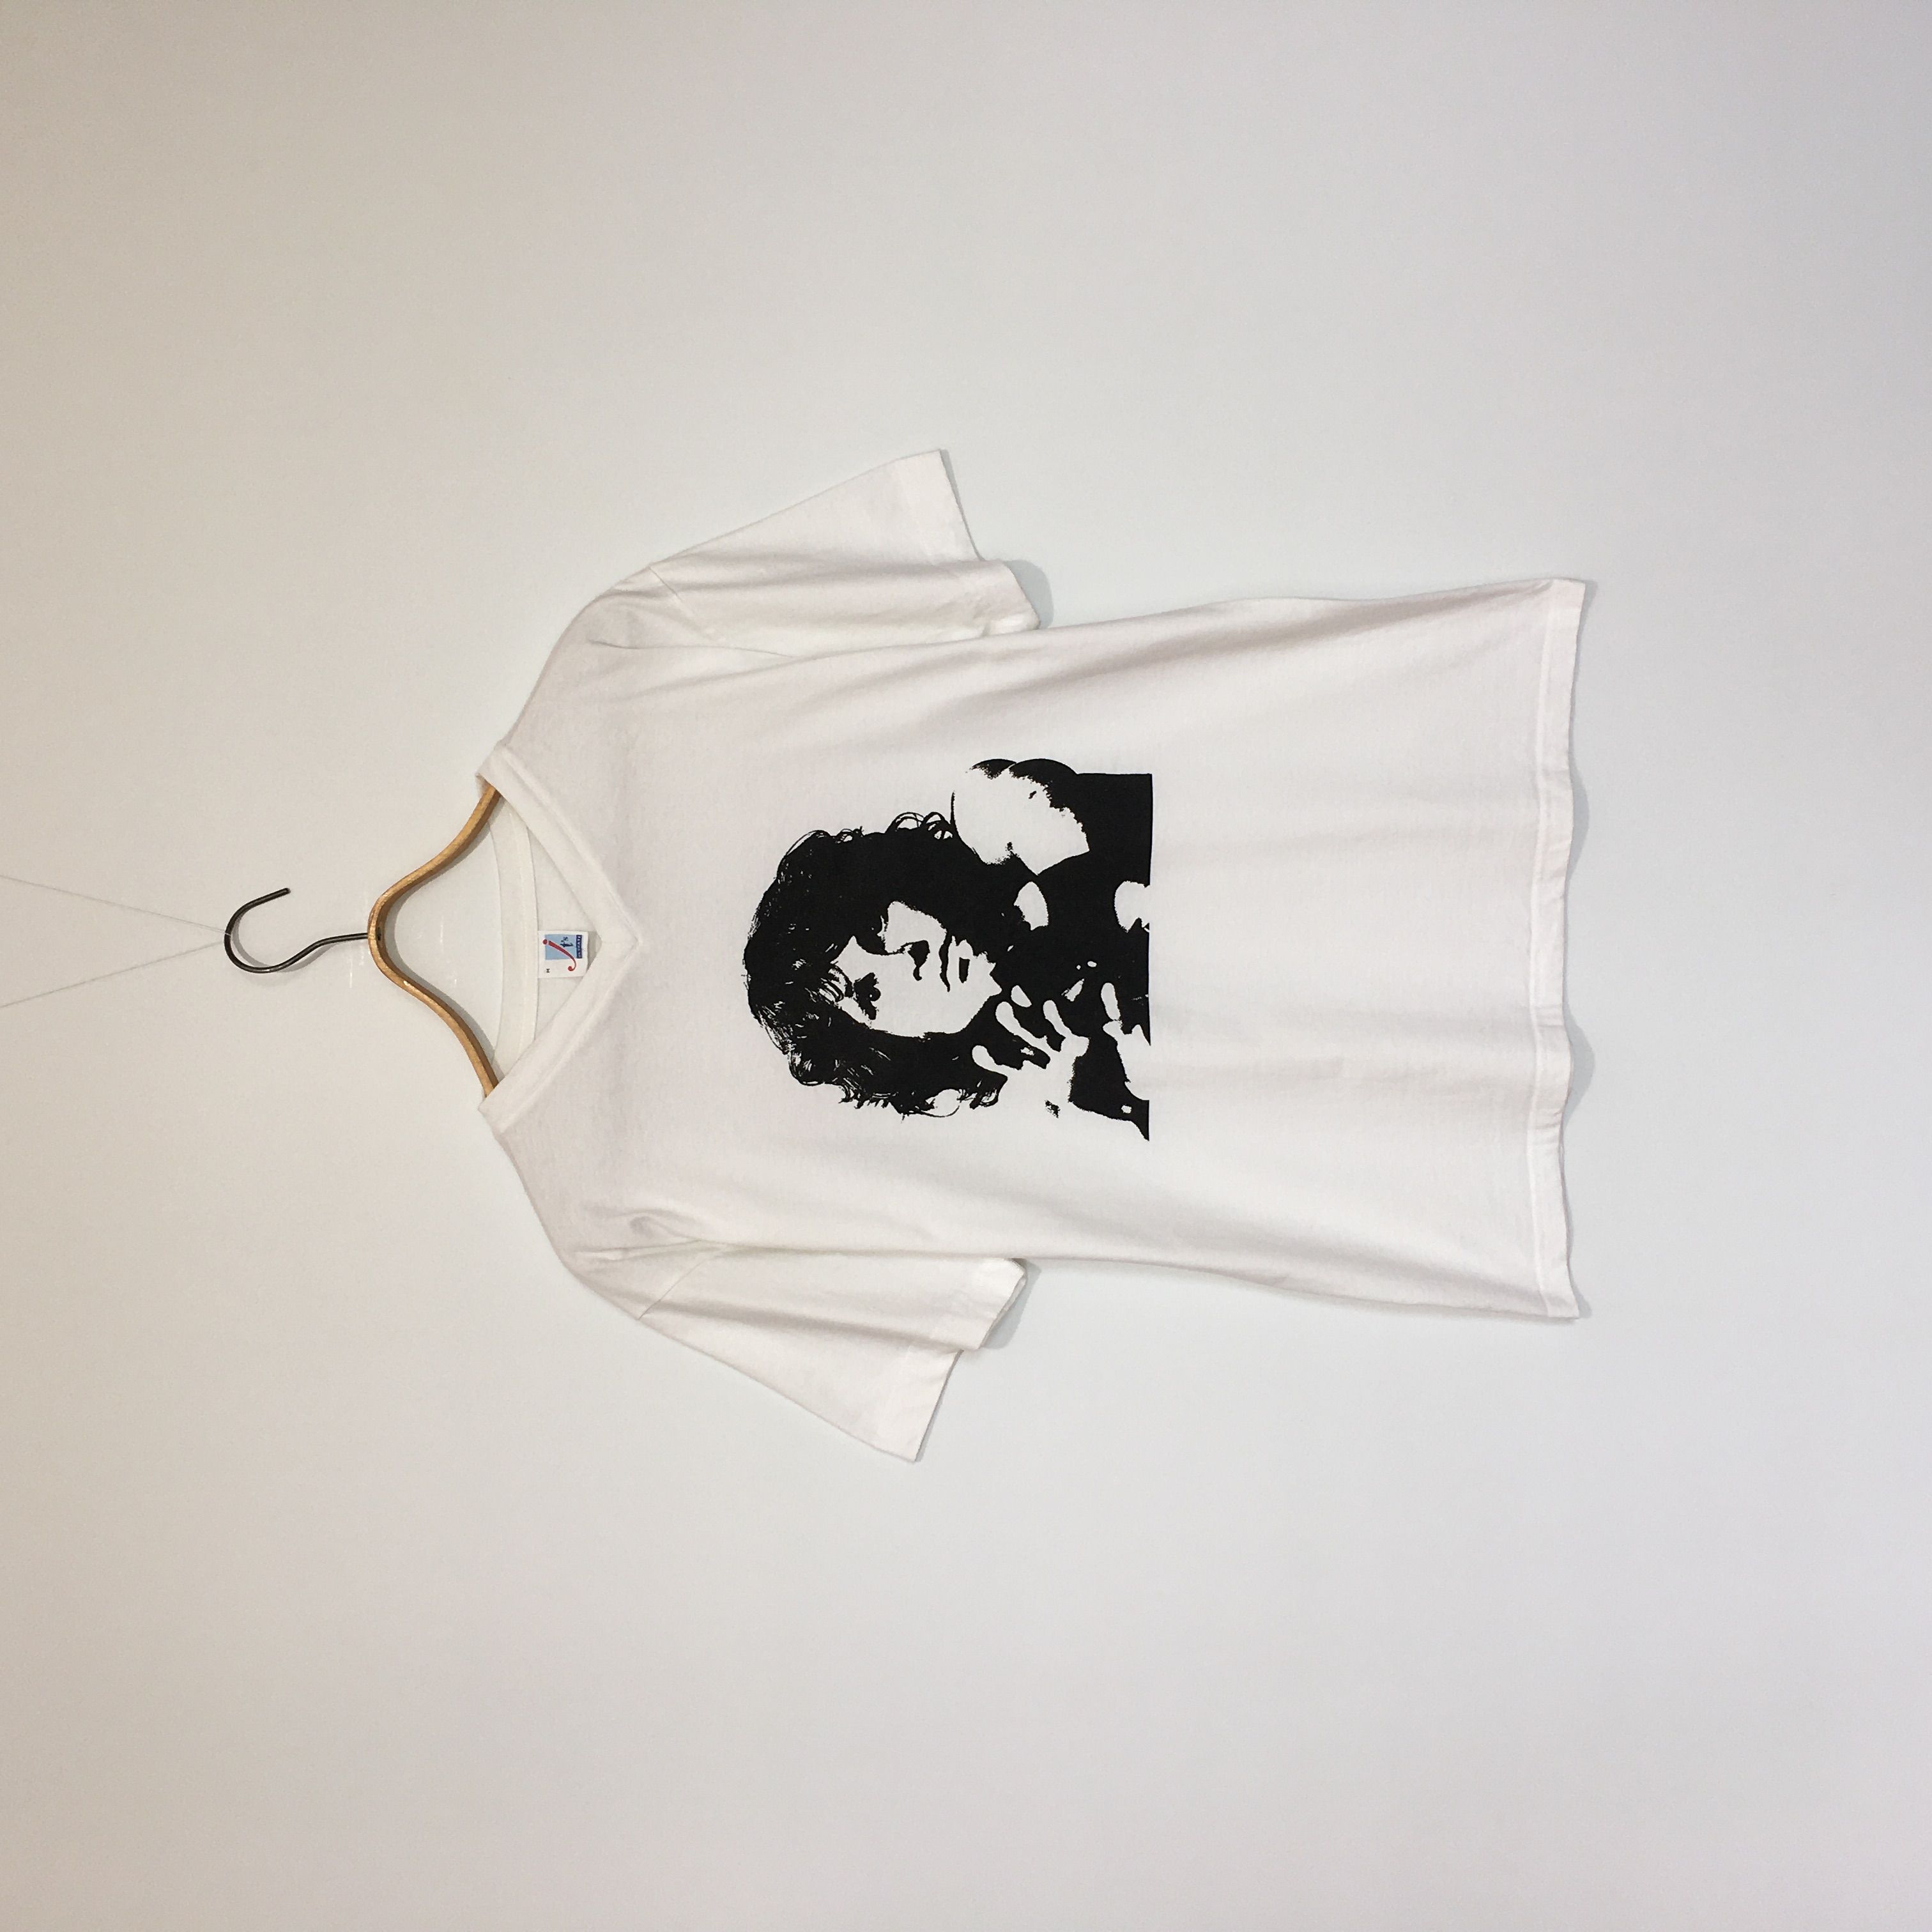 Pre-owned Band Tees X Rock Tees Vintage 2001 The Doors Jim Morrison T-shirt Size M In White